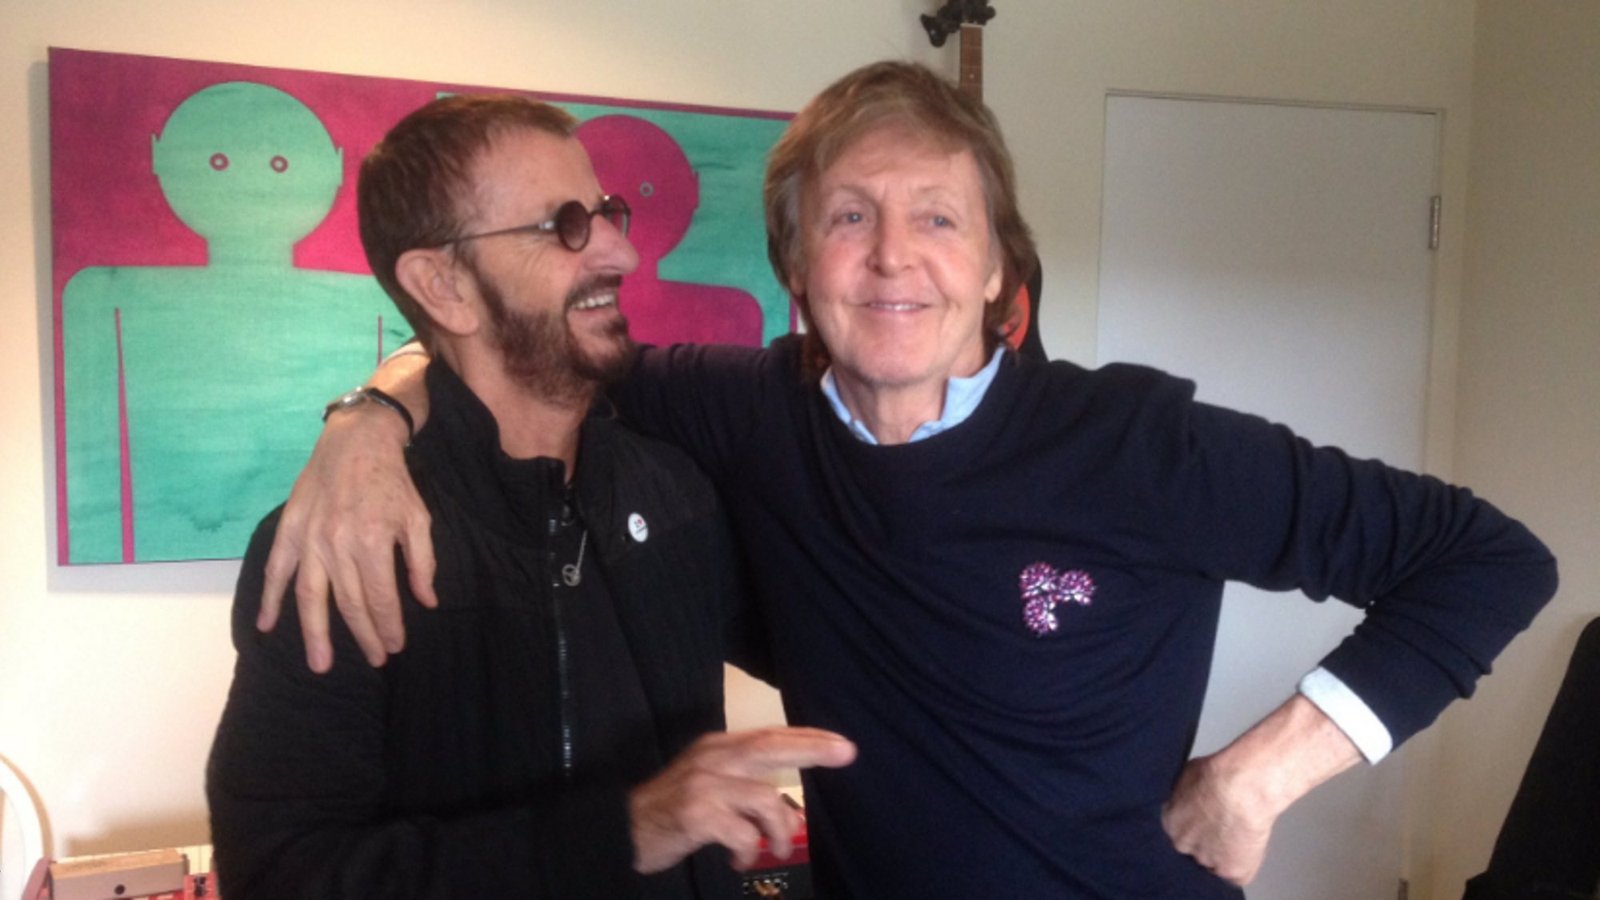 Beatles Paul and Ringo come together over new music